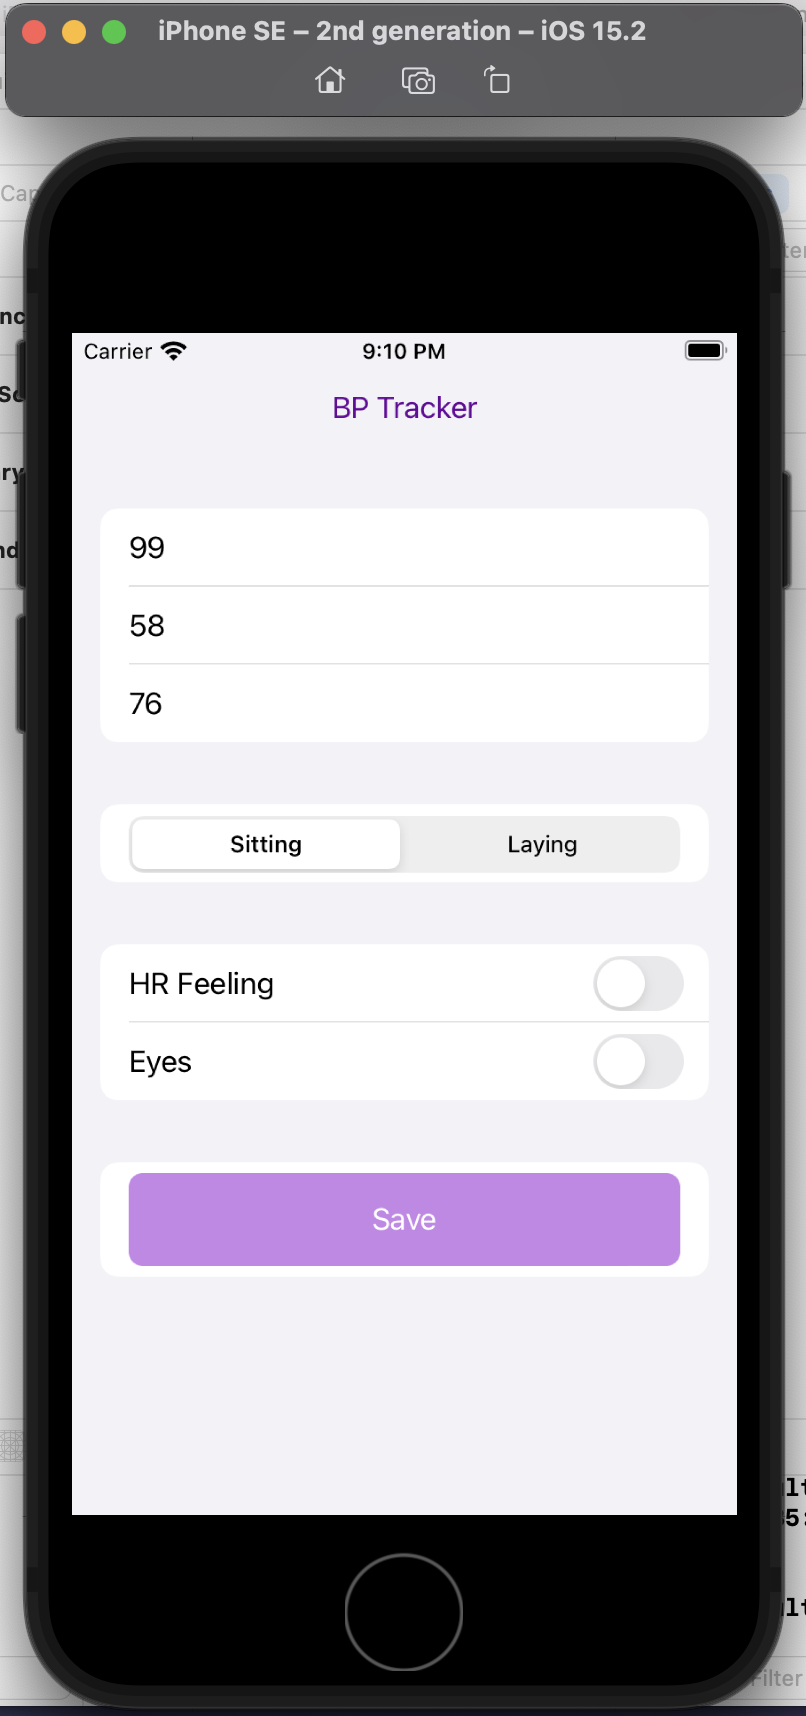 Simulator iphone with a basic iOS app that intakes BP, pulse, buttons for indicating whether BP was taken sitting or laying down; and toggles for key symptoms (in my case HR feeling or eyes), and a purple save button.